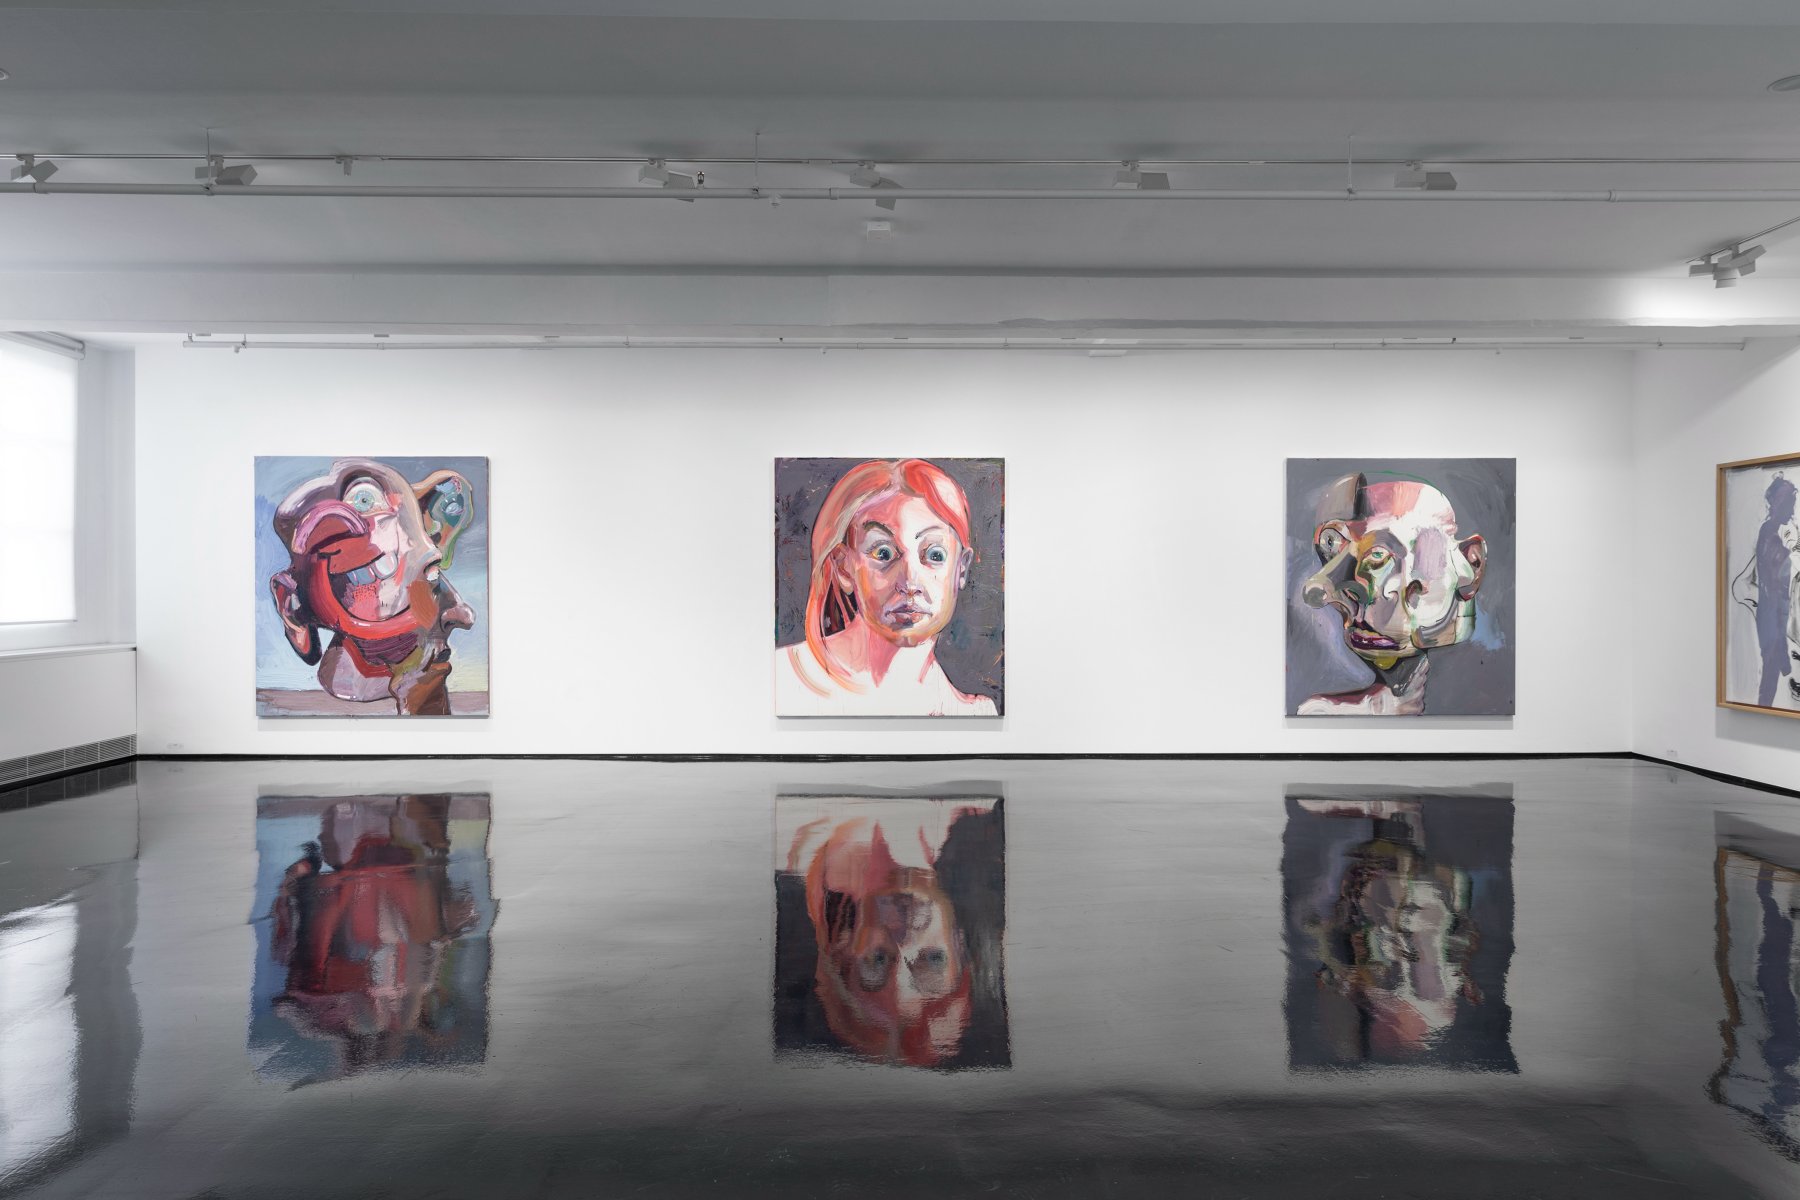 Installation image for Ben Quilty: Shadowed, at Tolarno Galleries